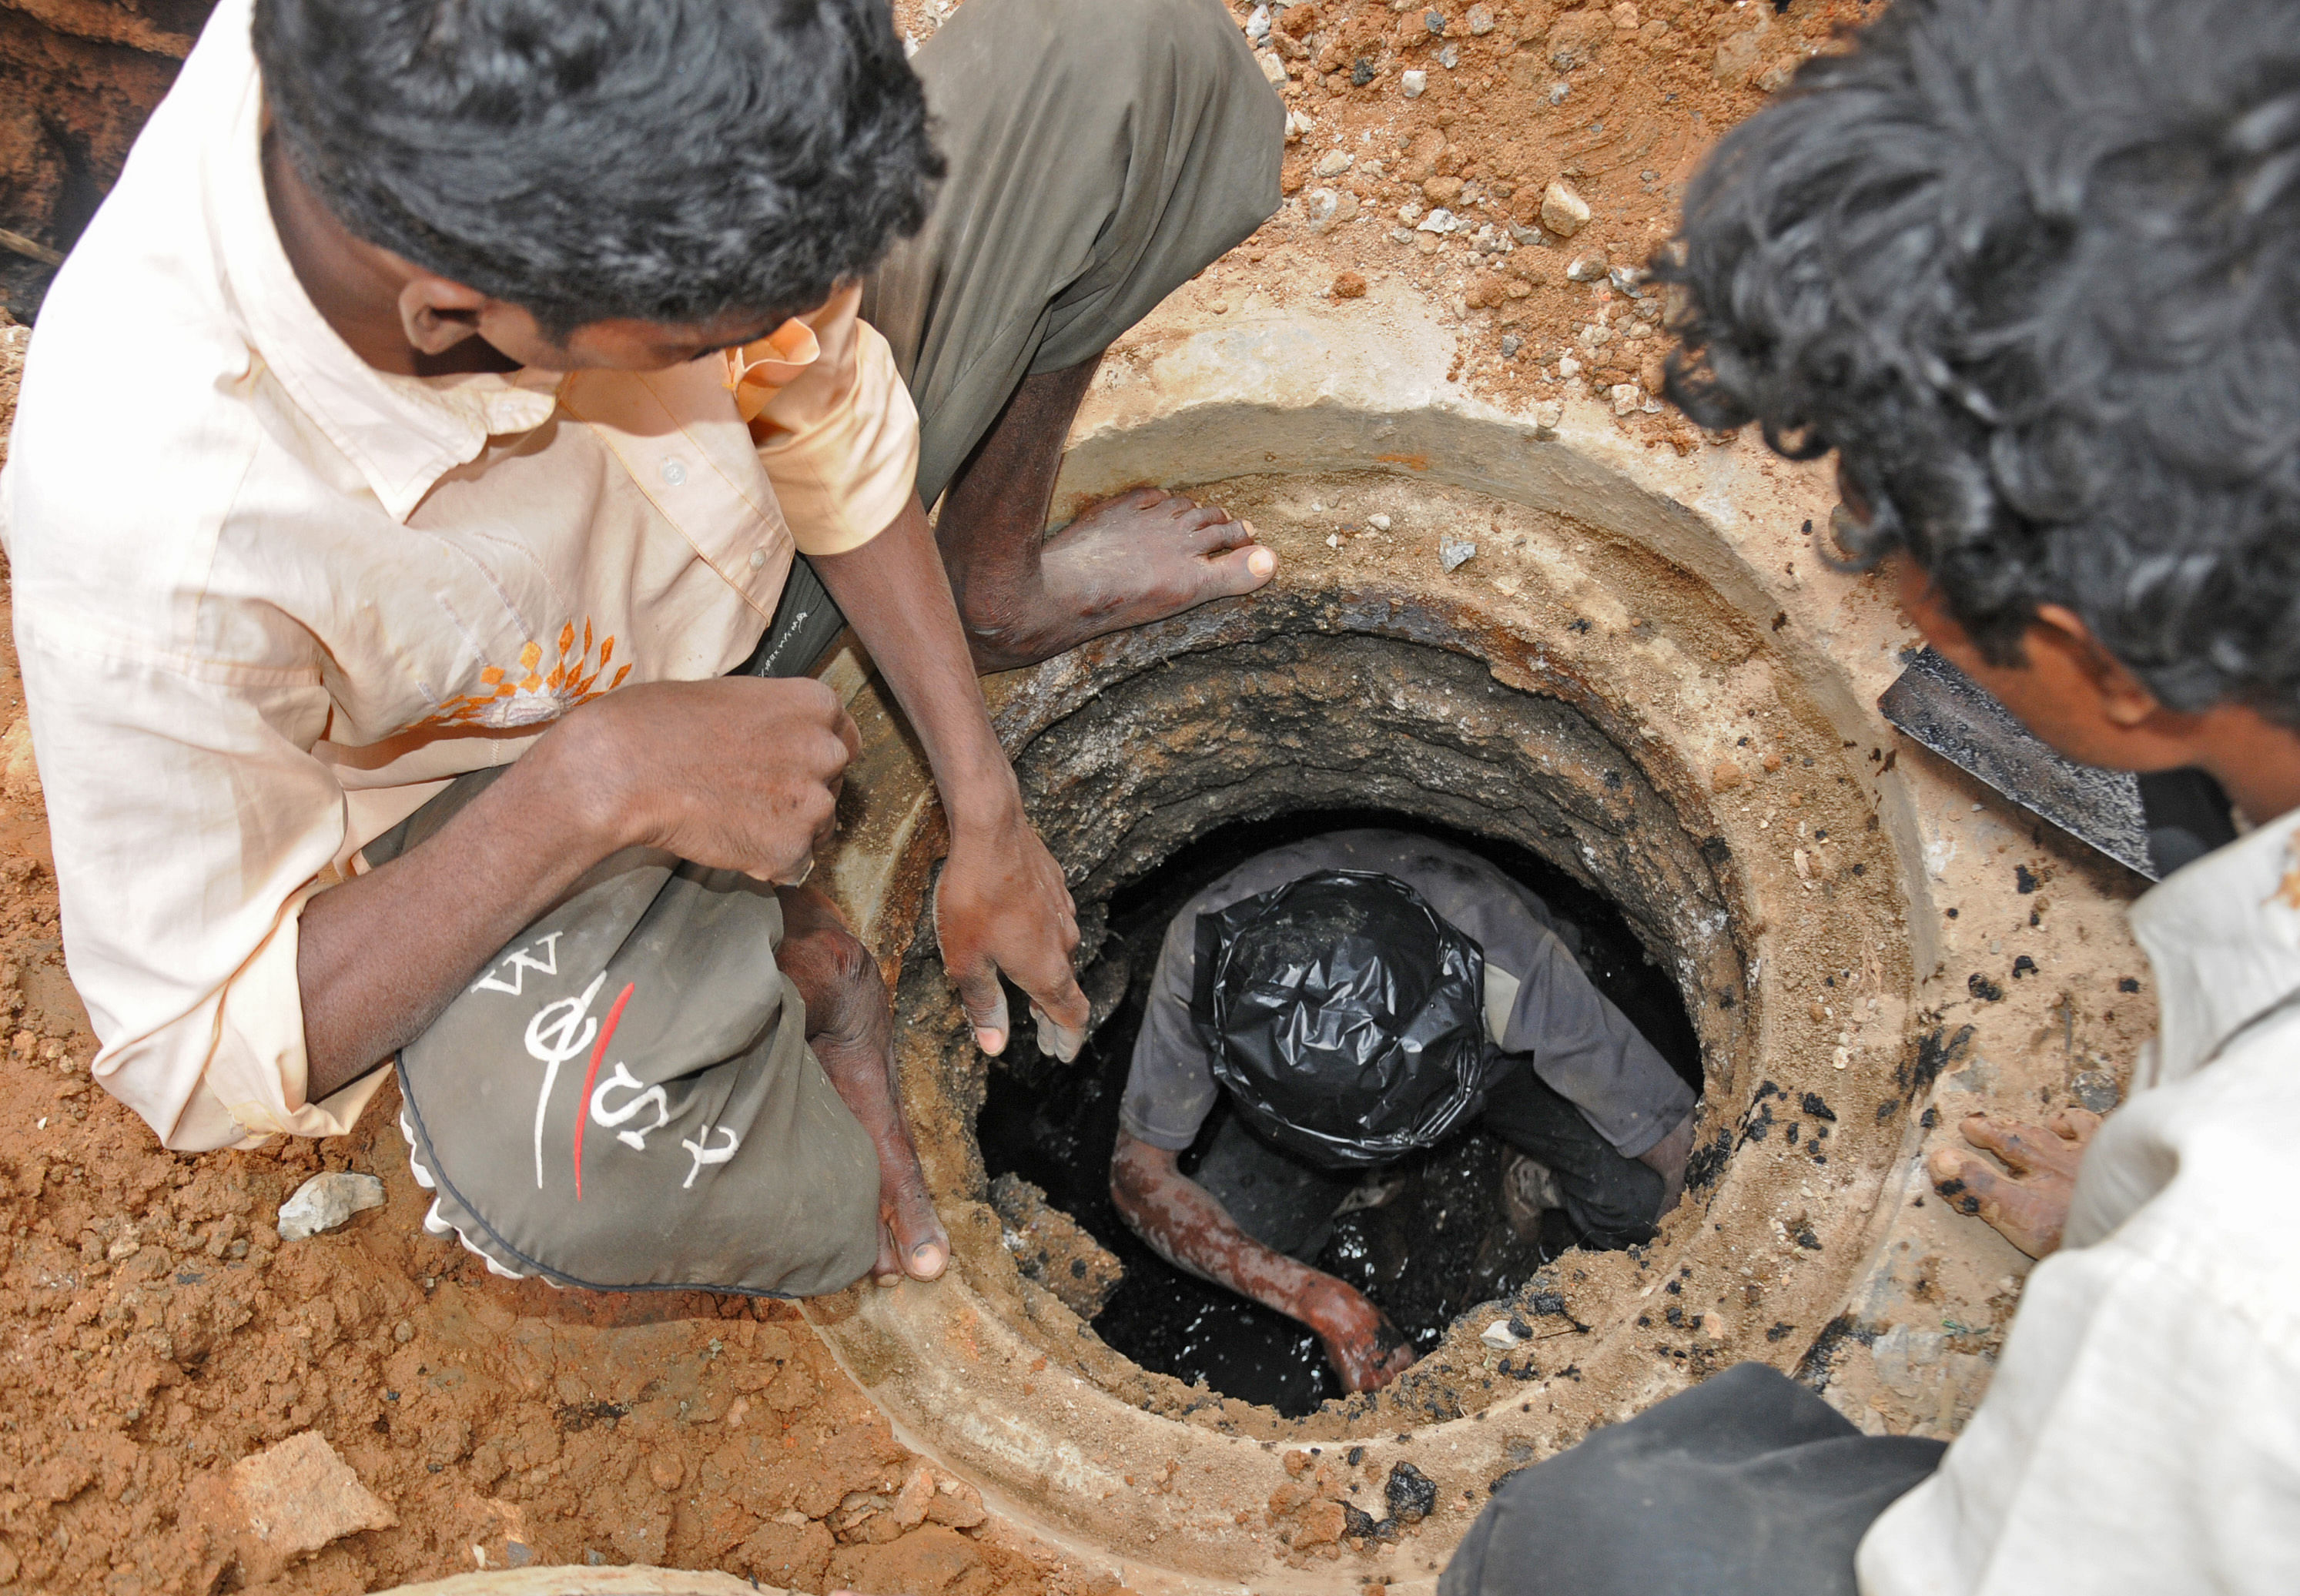 Workers clean a manhole without gloves and shoes at Siddegowda Street, near KH (Double) Road, Bengaluru. This picture was taken in 2013, after the High Court had instructed BWSSB to procure cleaning machines to prevent accidents. DH PHOTO BY S K DINESH